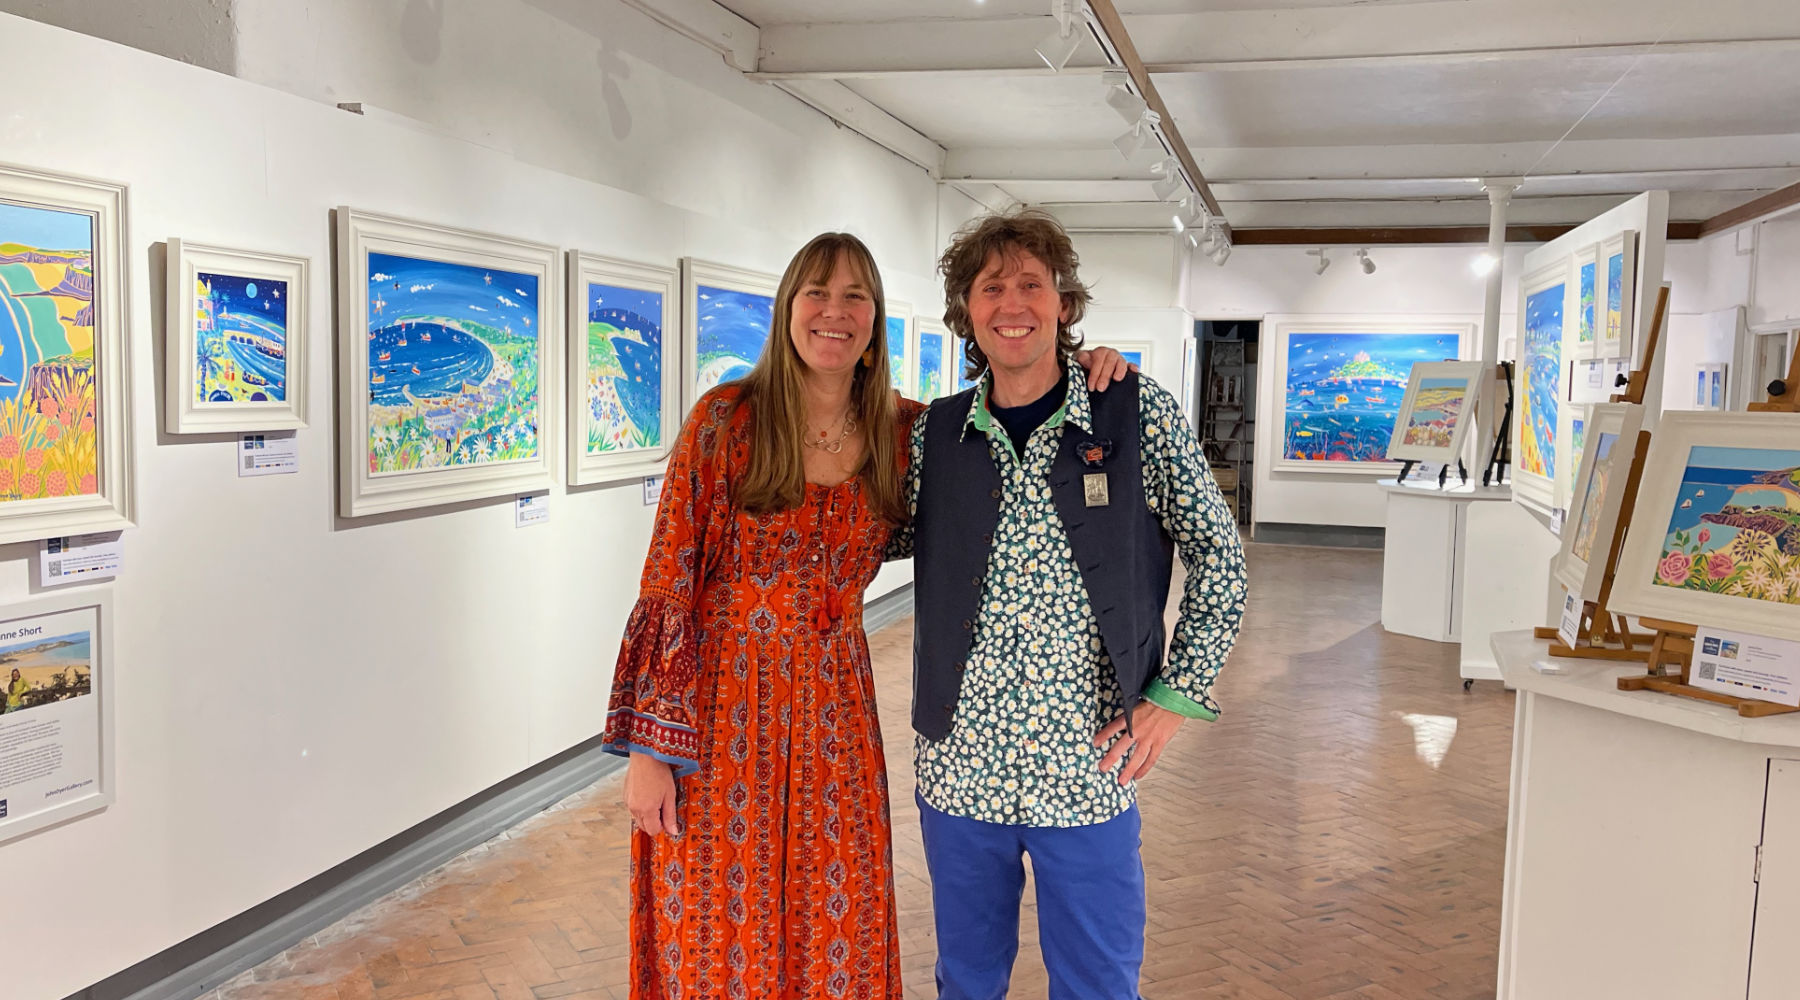 Joanne Short and John Dyer at the Crypt Gallery, St Ives society of Artists in Cornwall